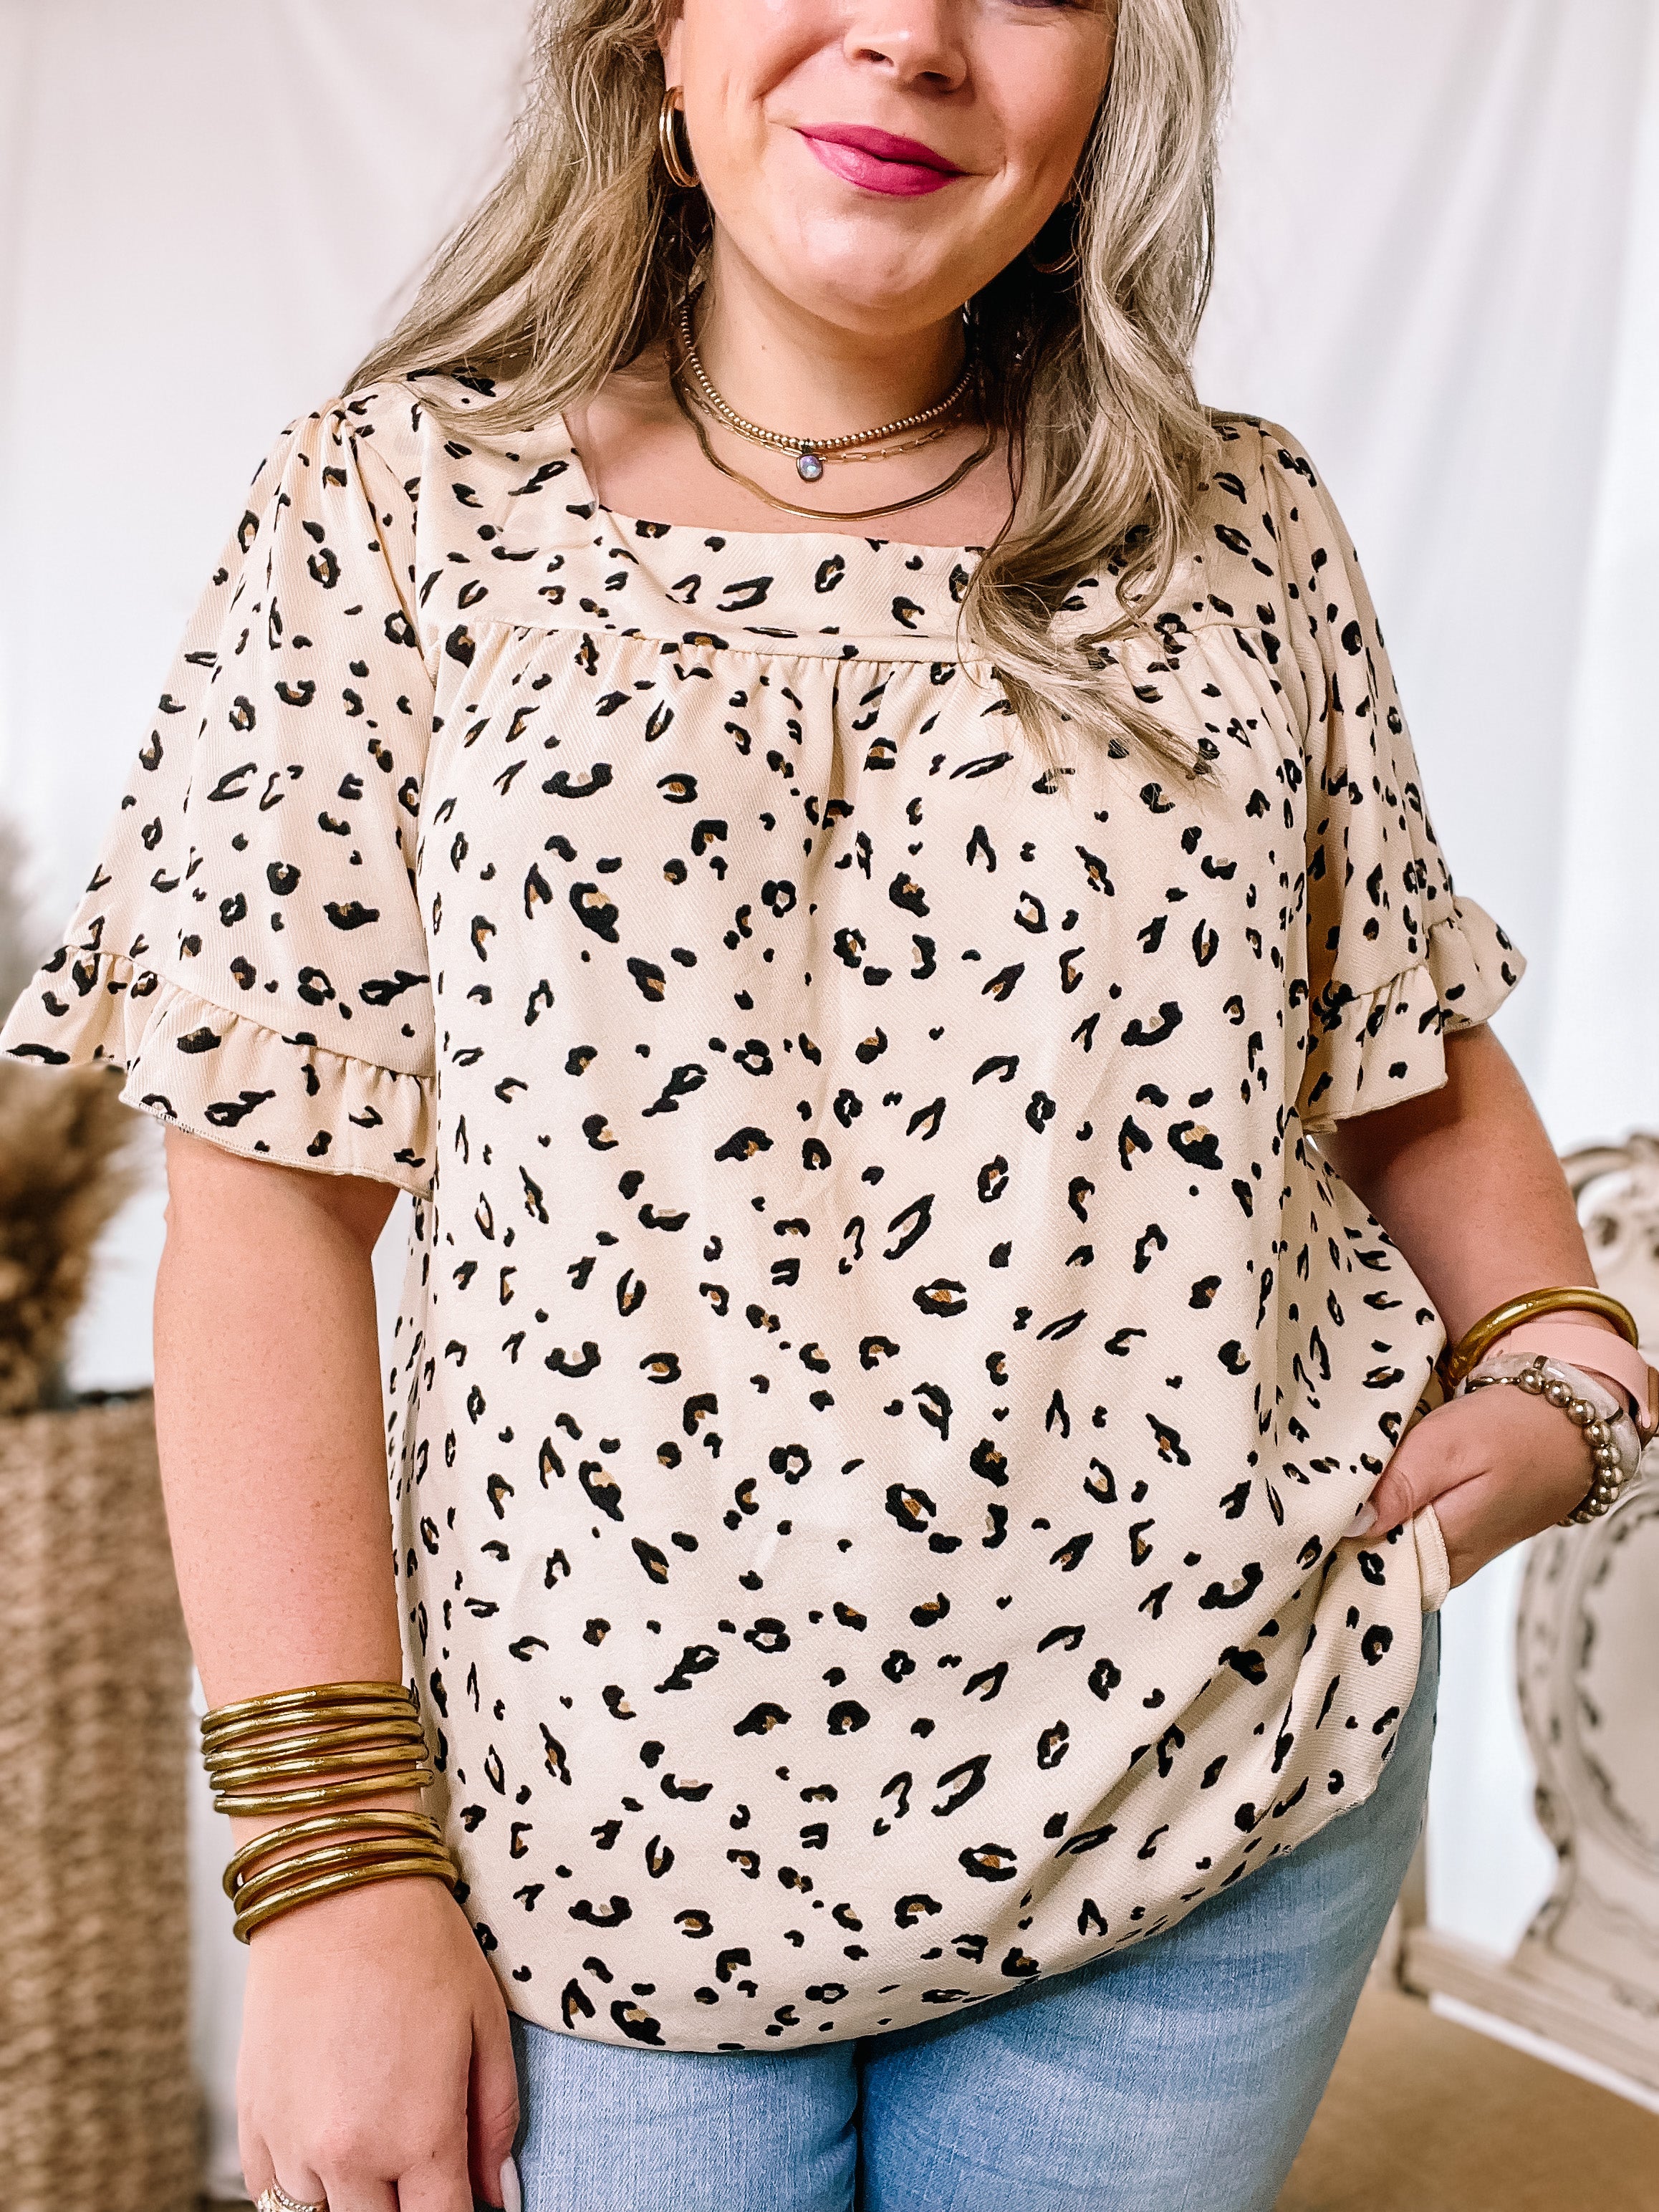 New Best Friend Square Neck Ruffle Short Sleeve Top in Leopard Print - Giddy Up Glamour Boutique